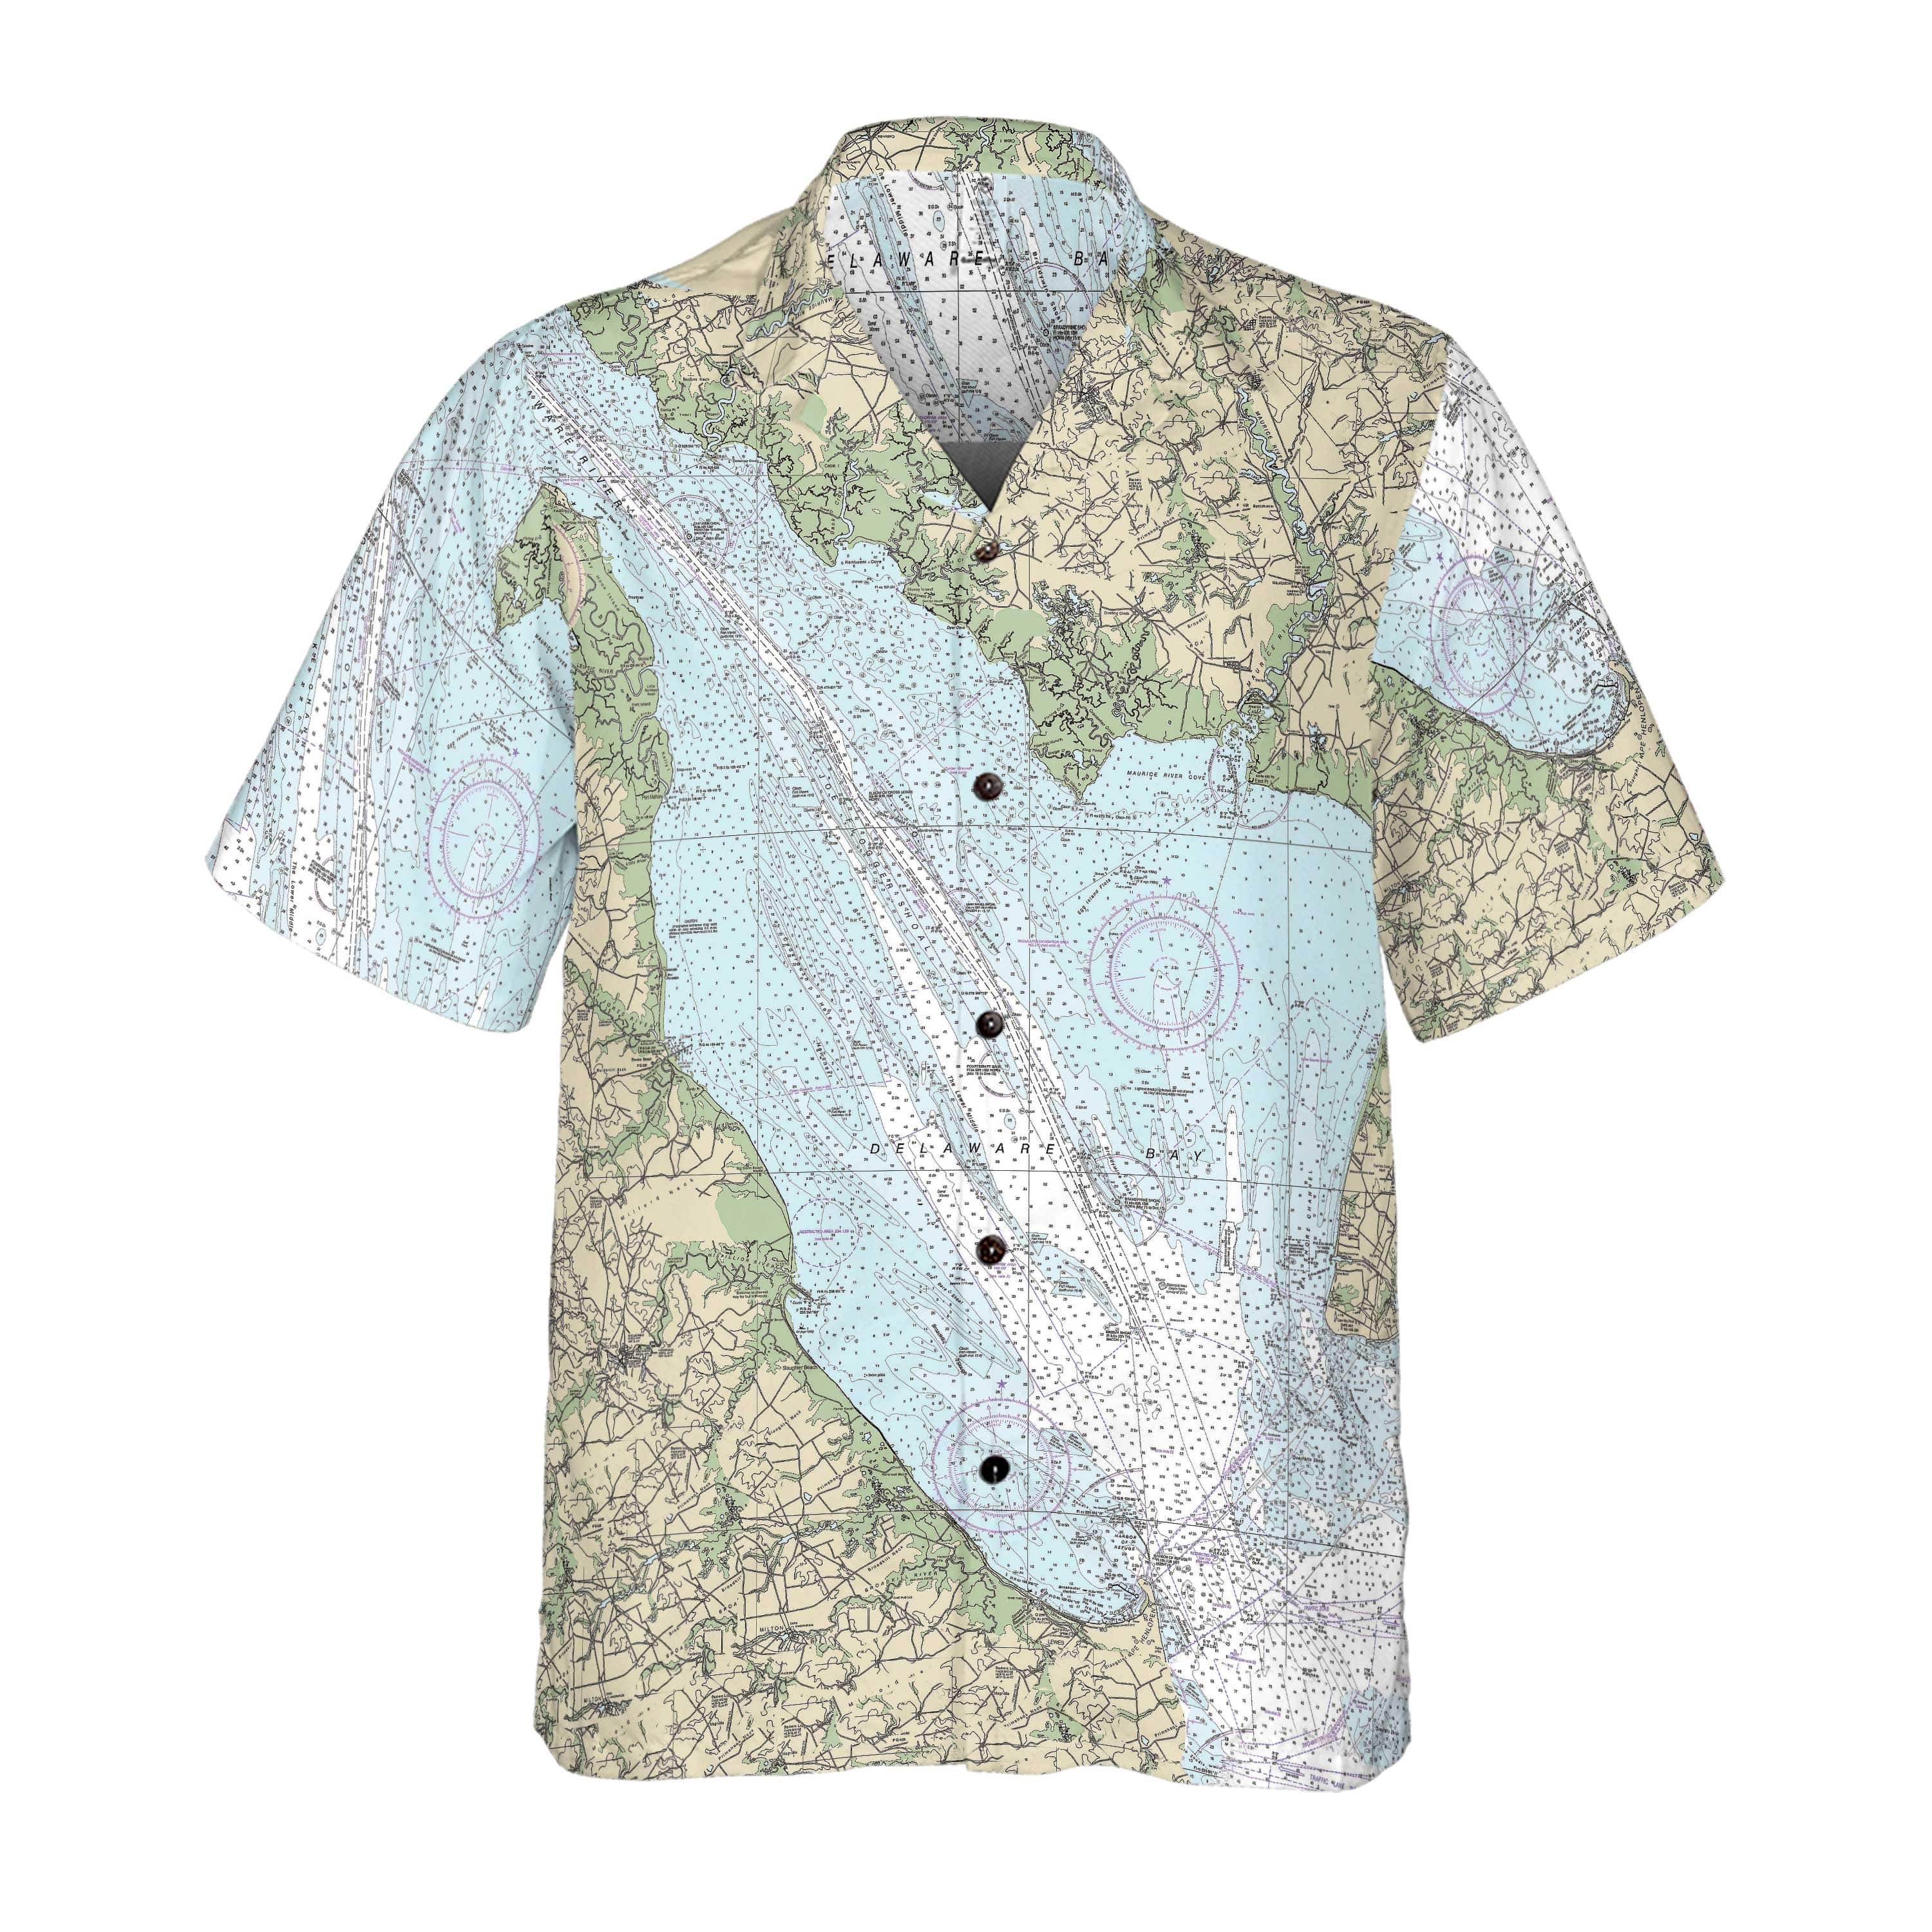 The Delaware Bay Coconut Button Camp Shirt